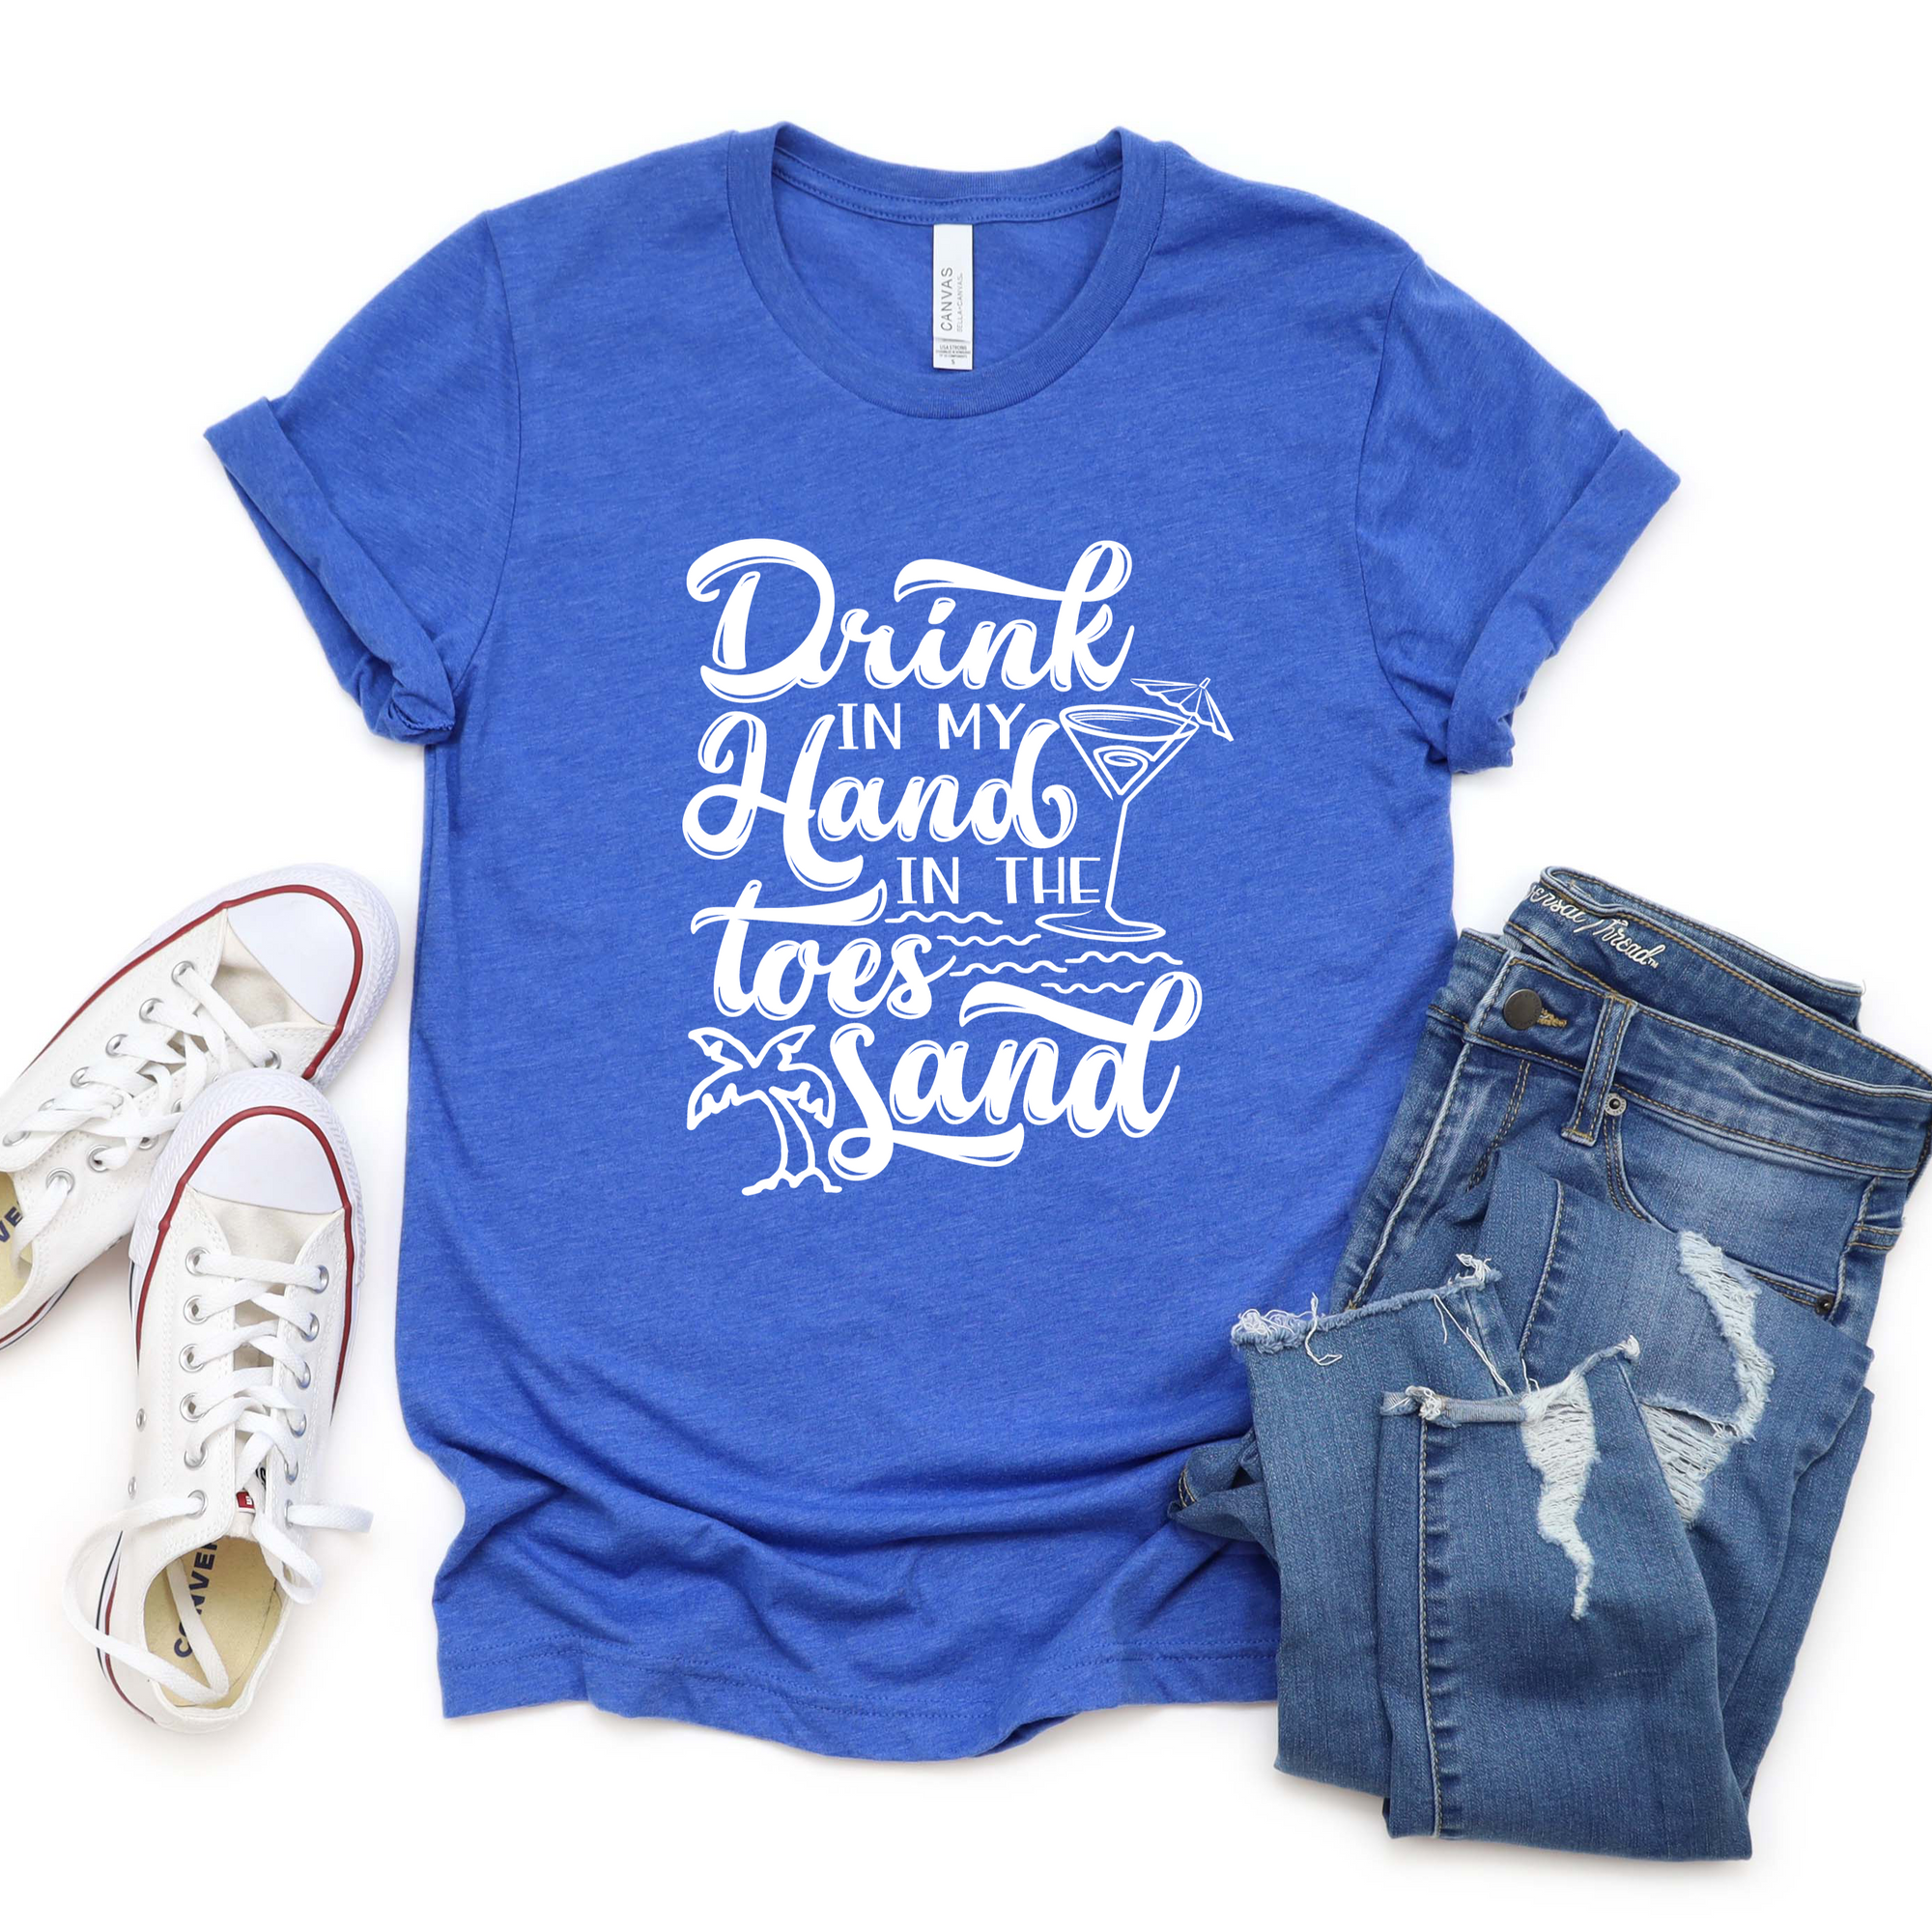 Drink In My Hand Toes in the Sand Tee or Tank